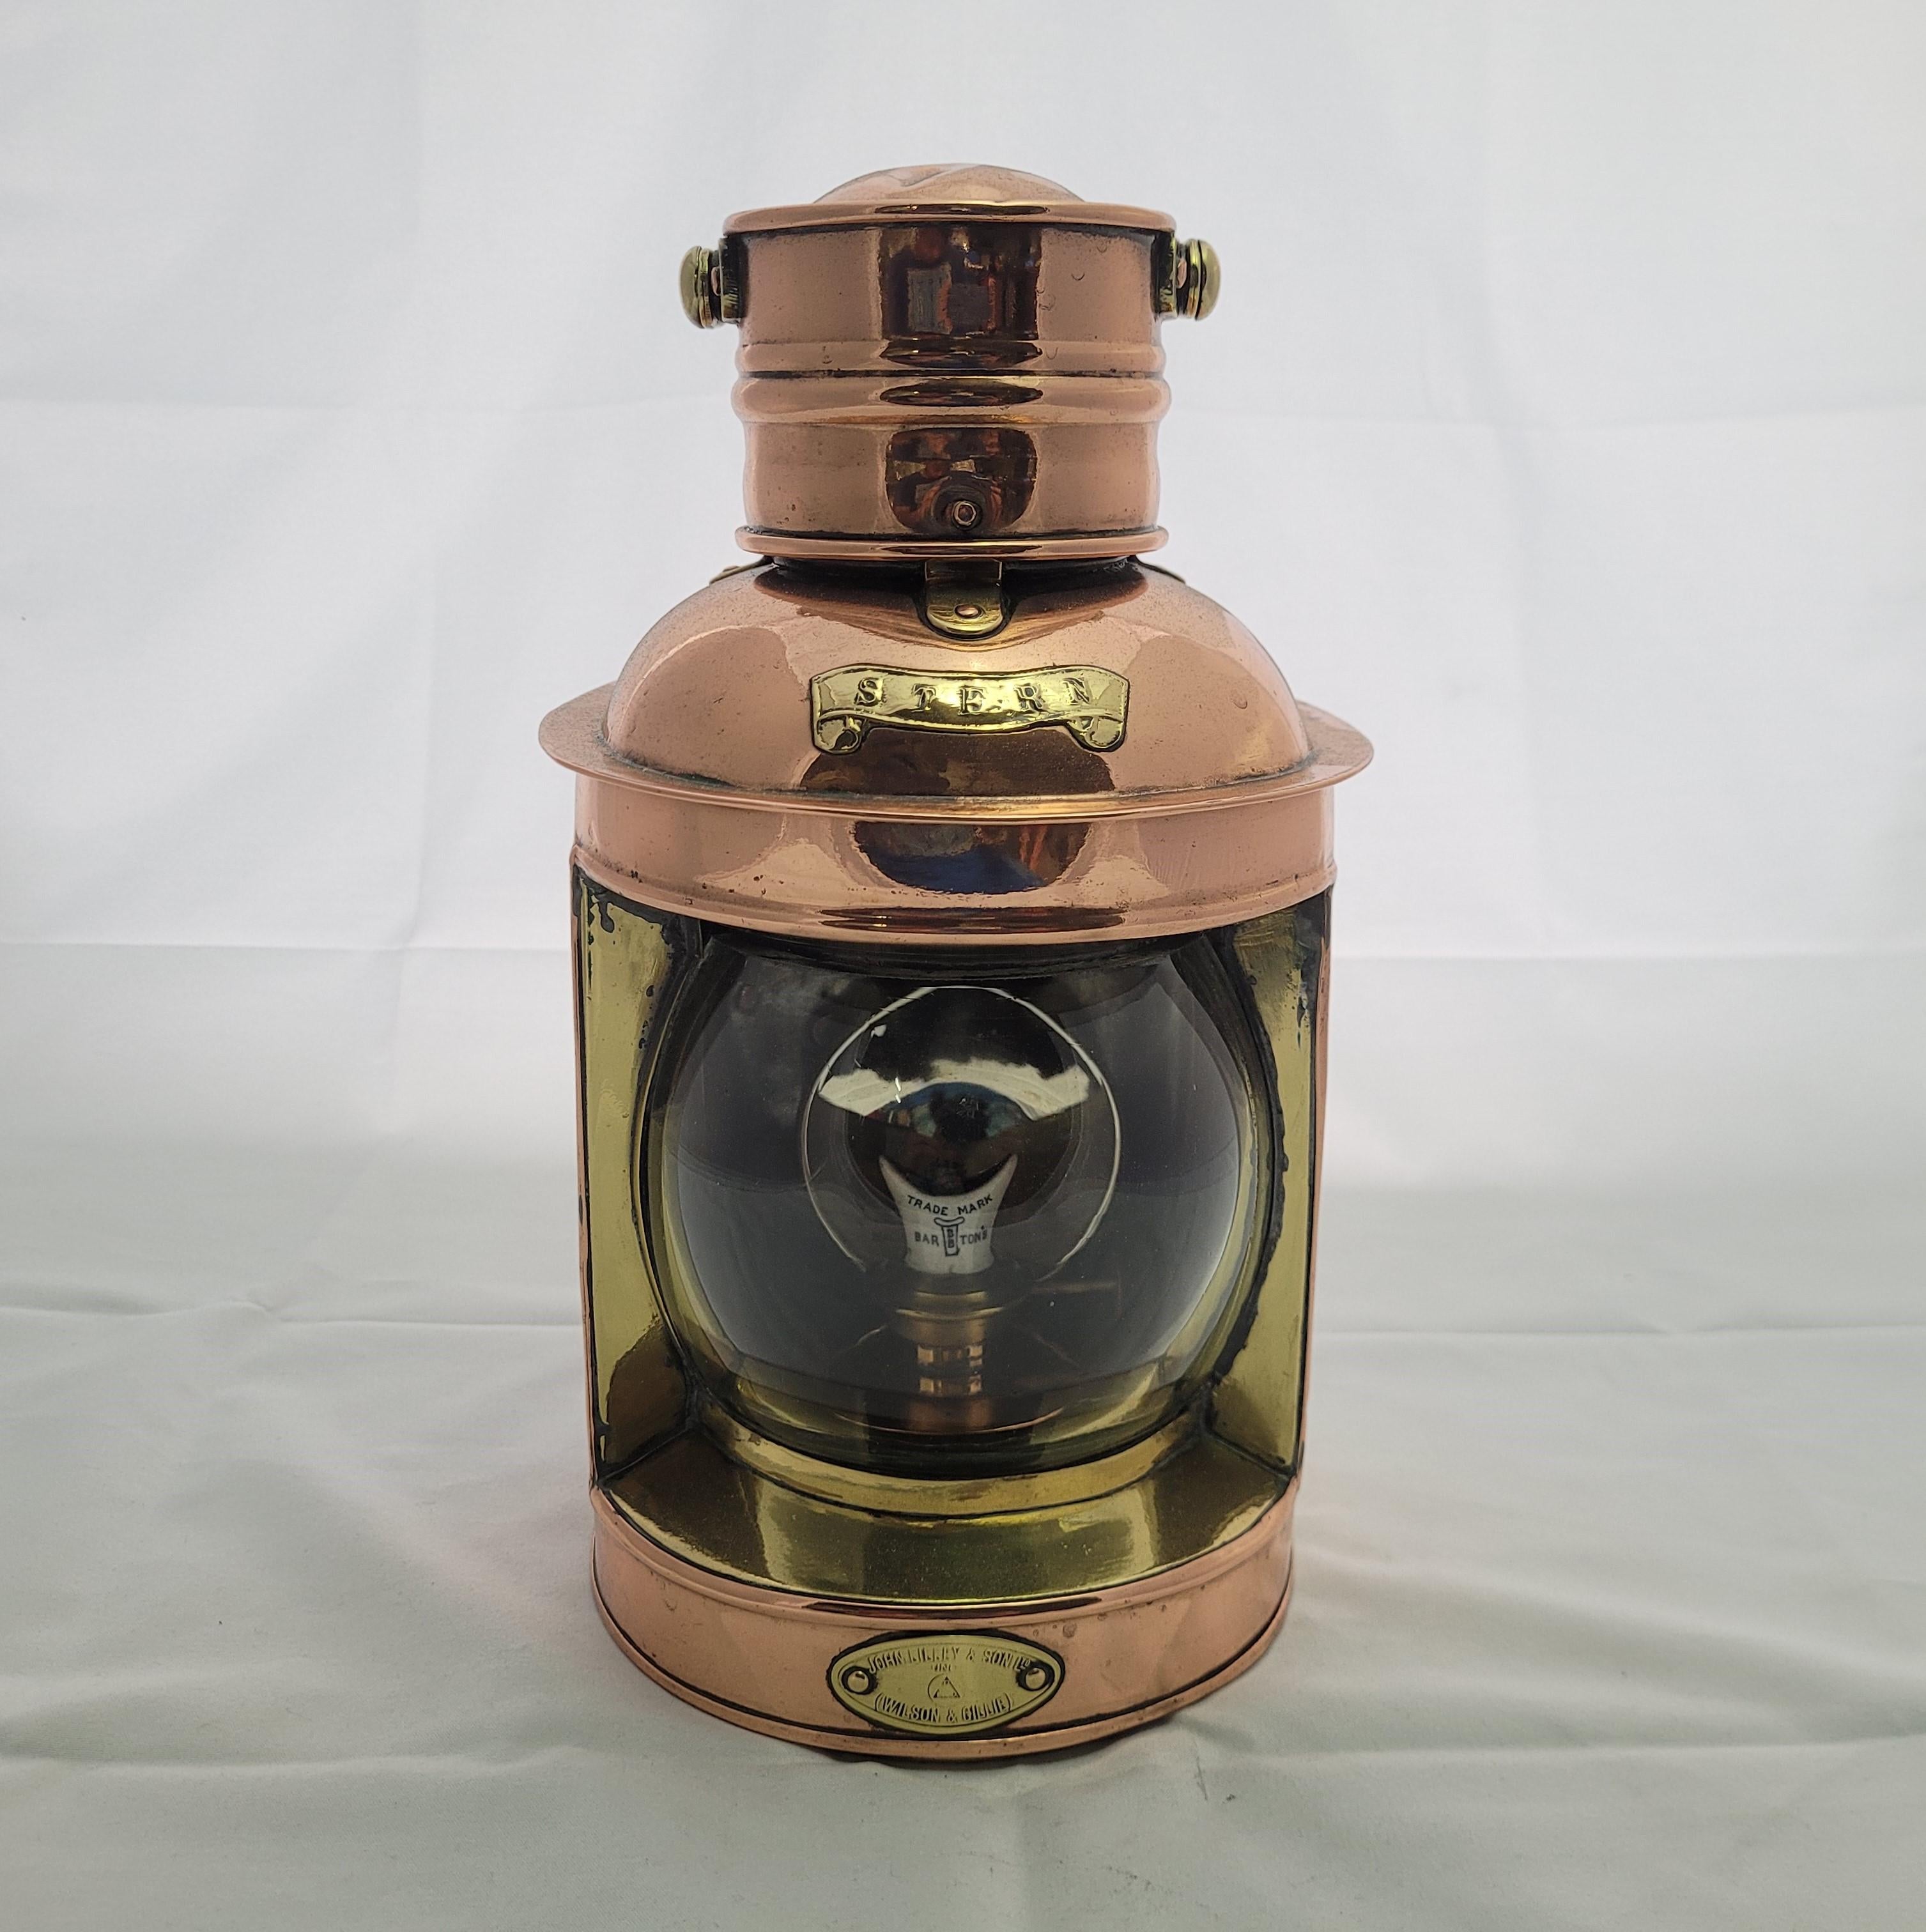 Highly polished copper and brass trimmed ships lantern with glass lens, Brass 